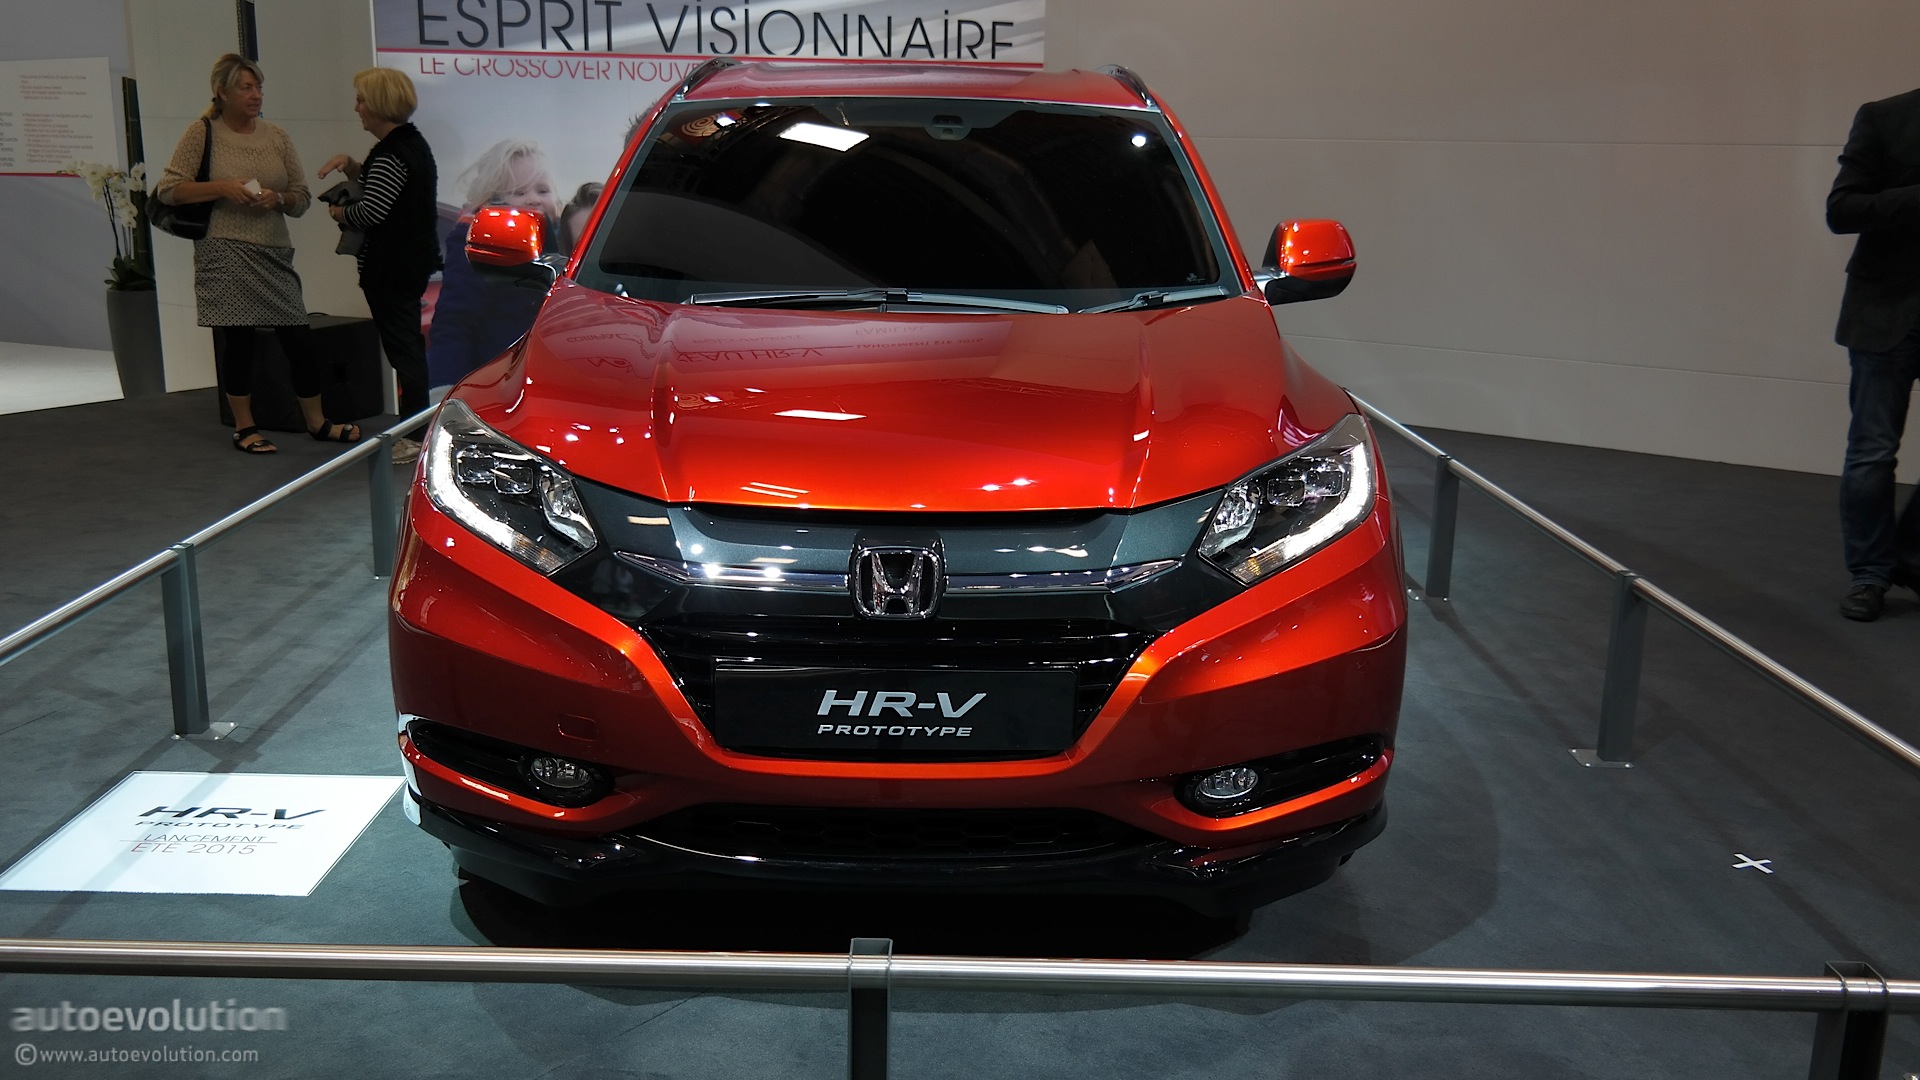 2015 Honda HR-V Is Compact and Stylish at Paris 2014 Debut [Live.